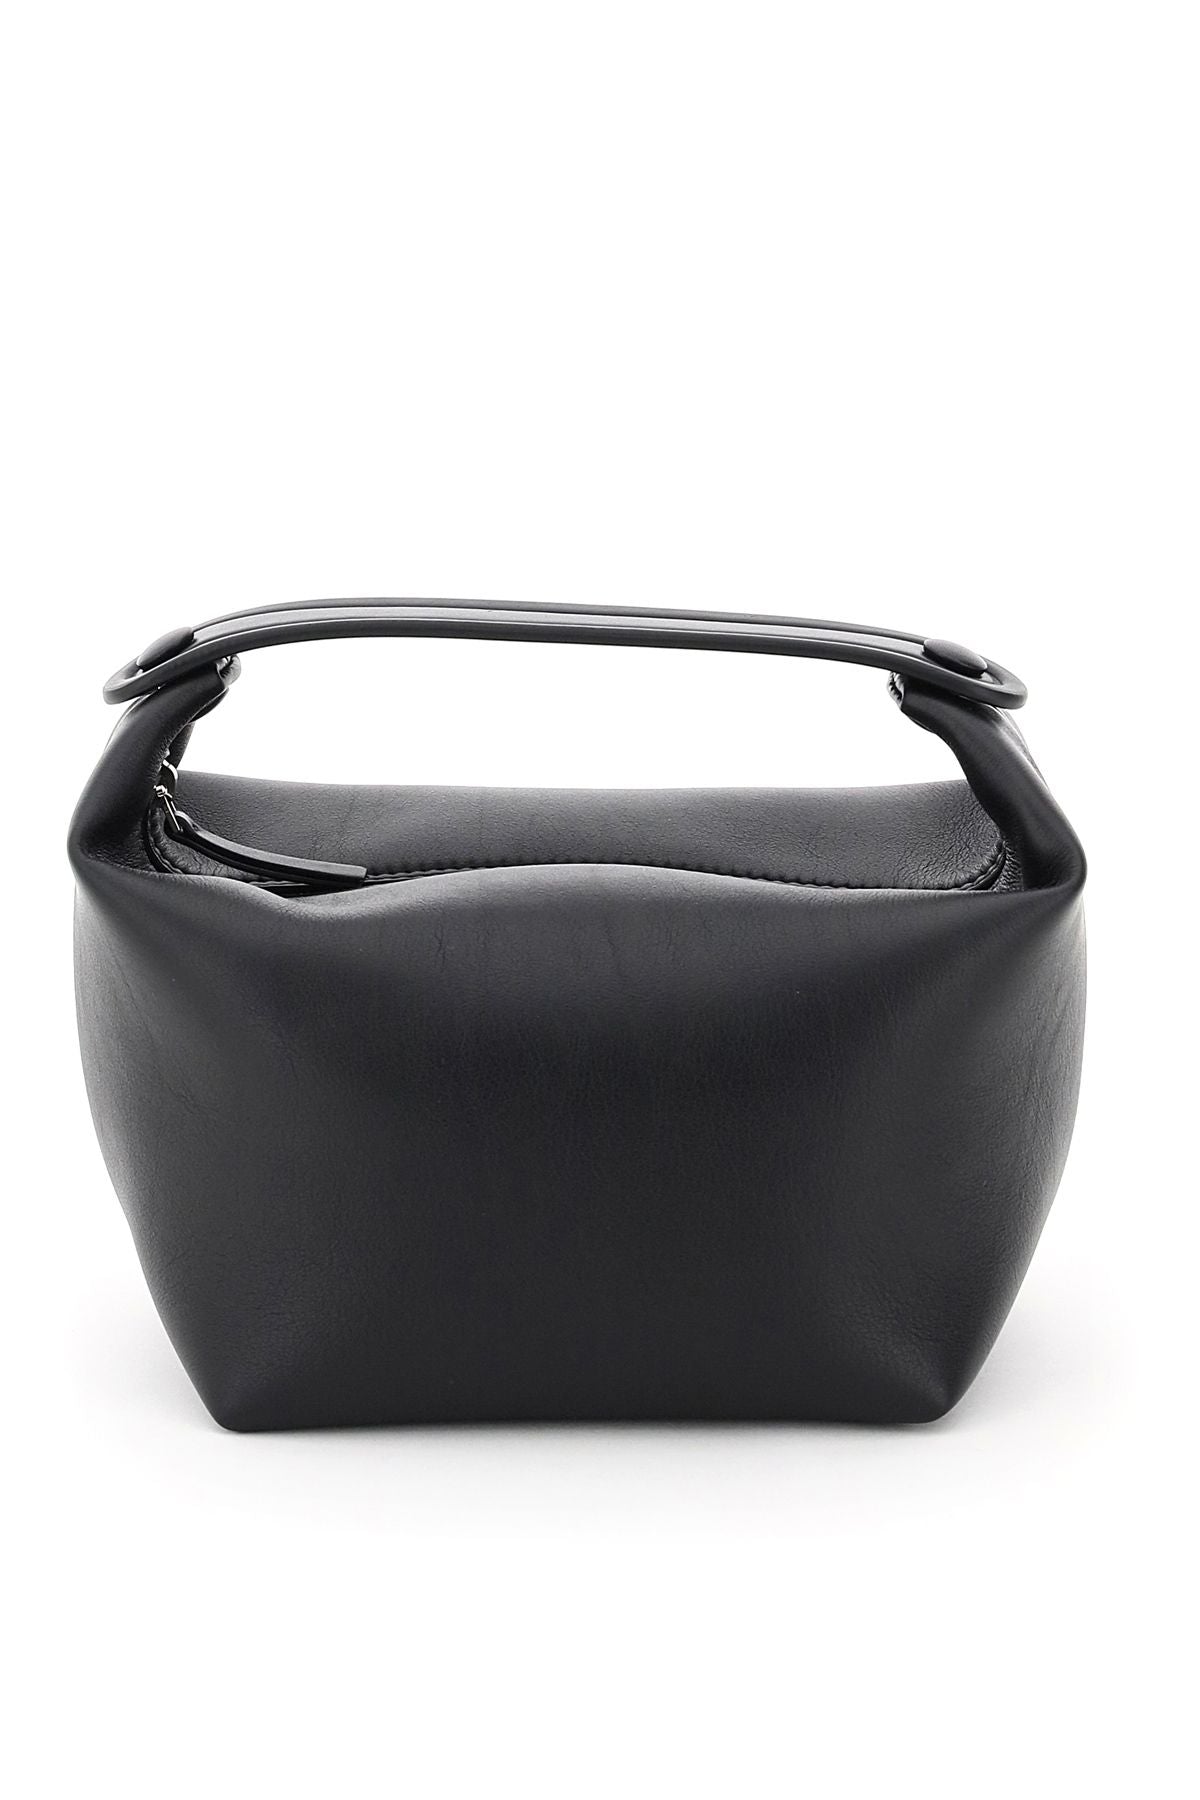 The Row Black Les Bains Bag in Leather – SERENDIPITY